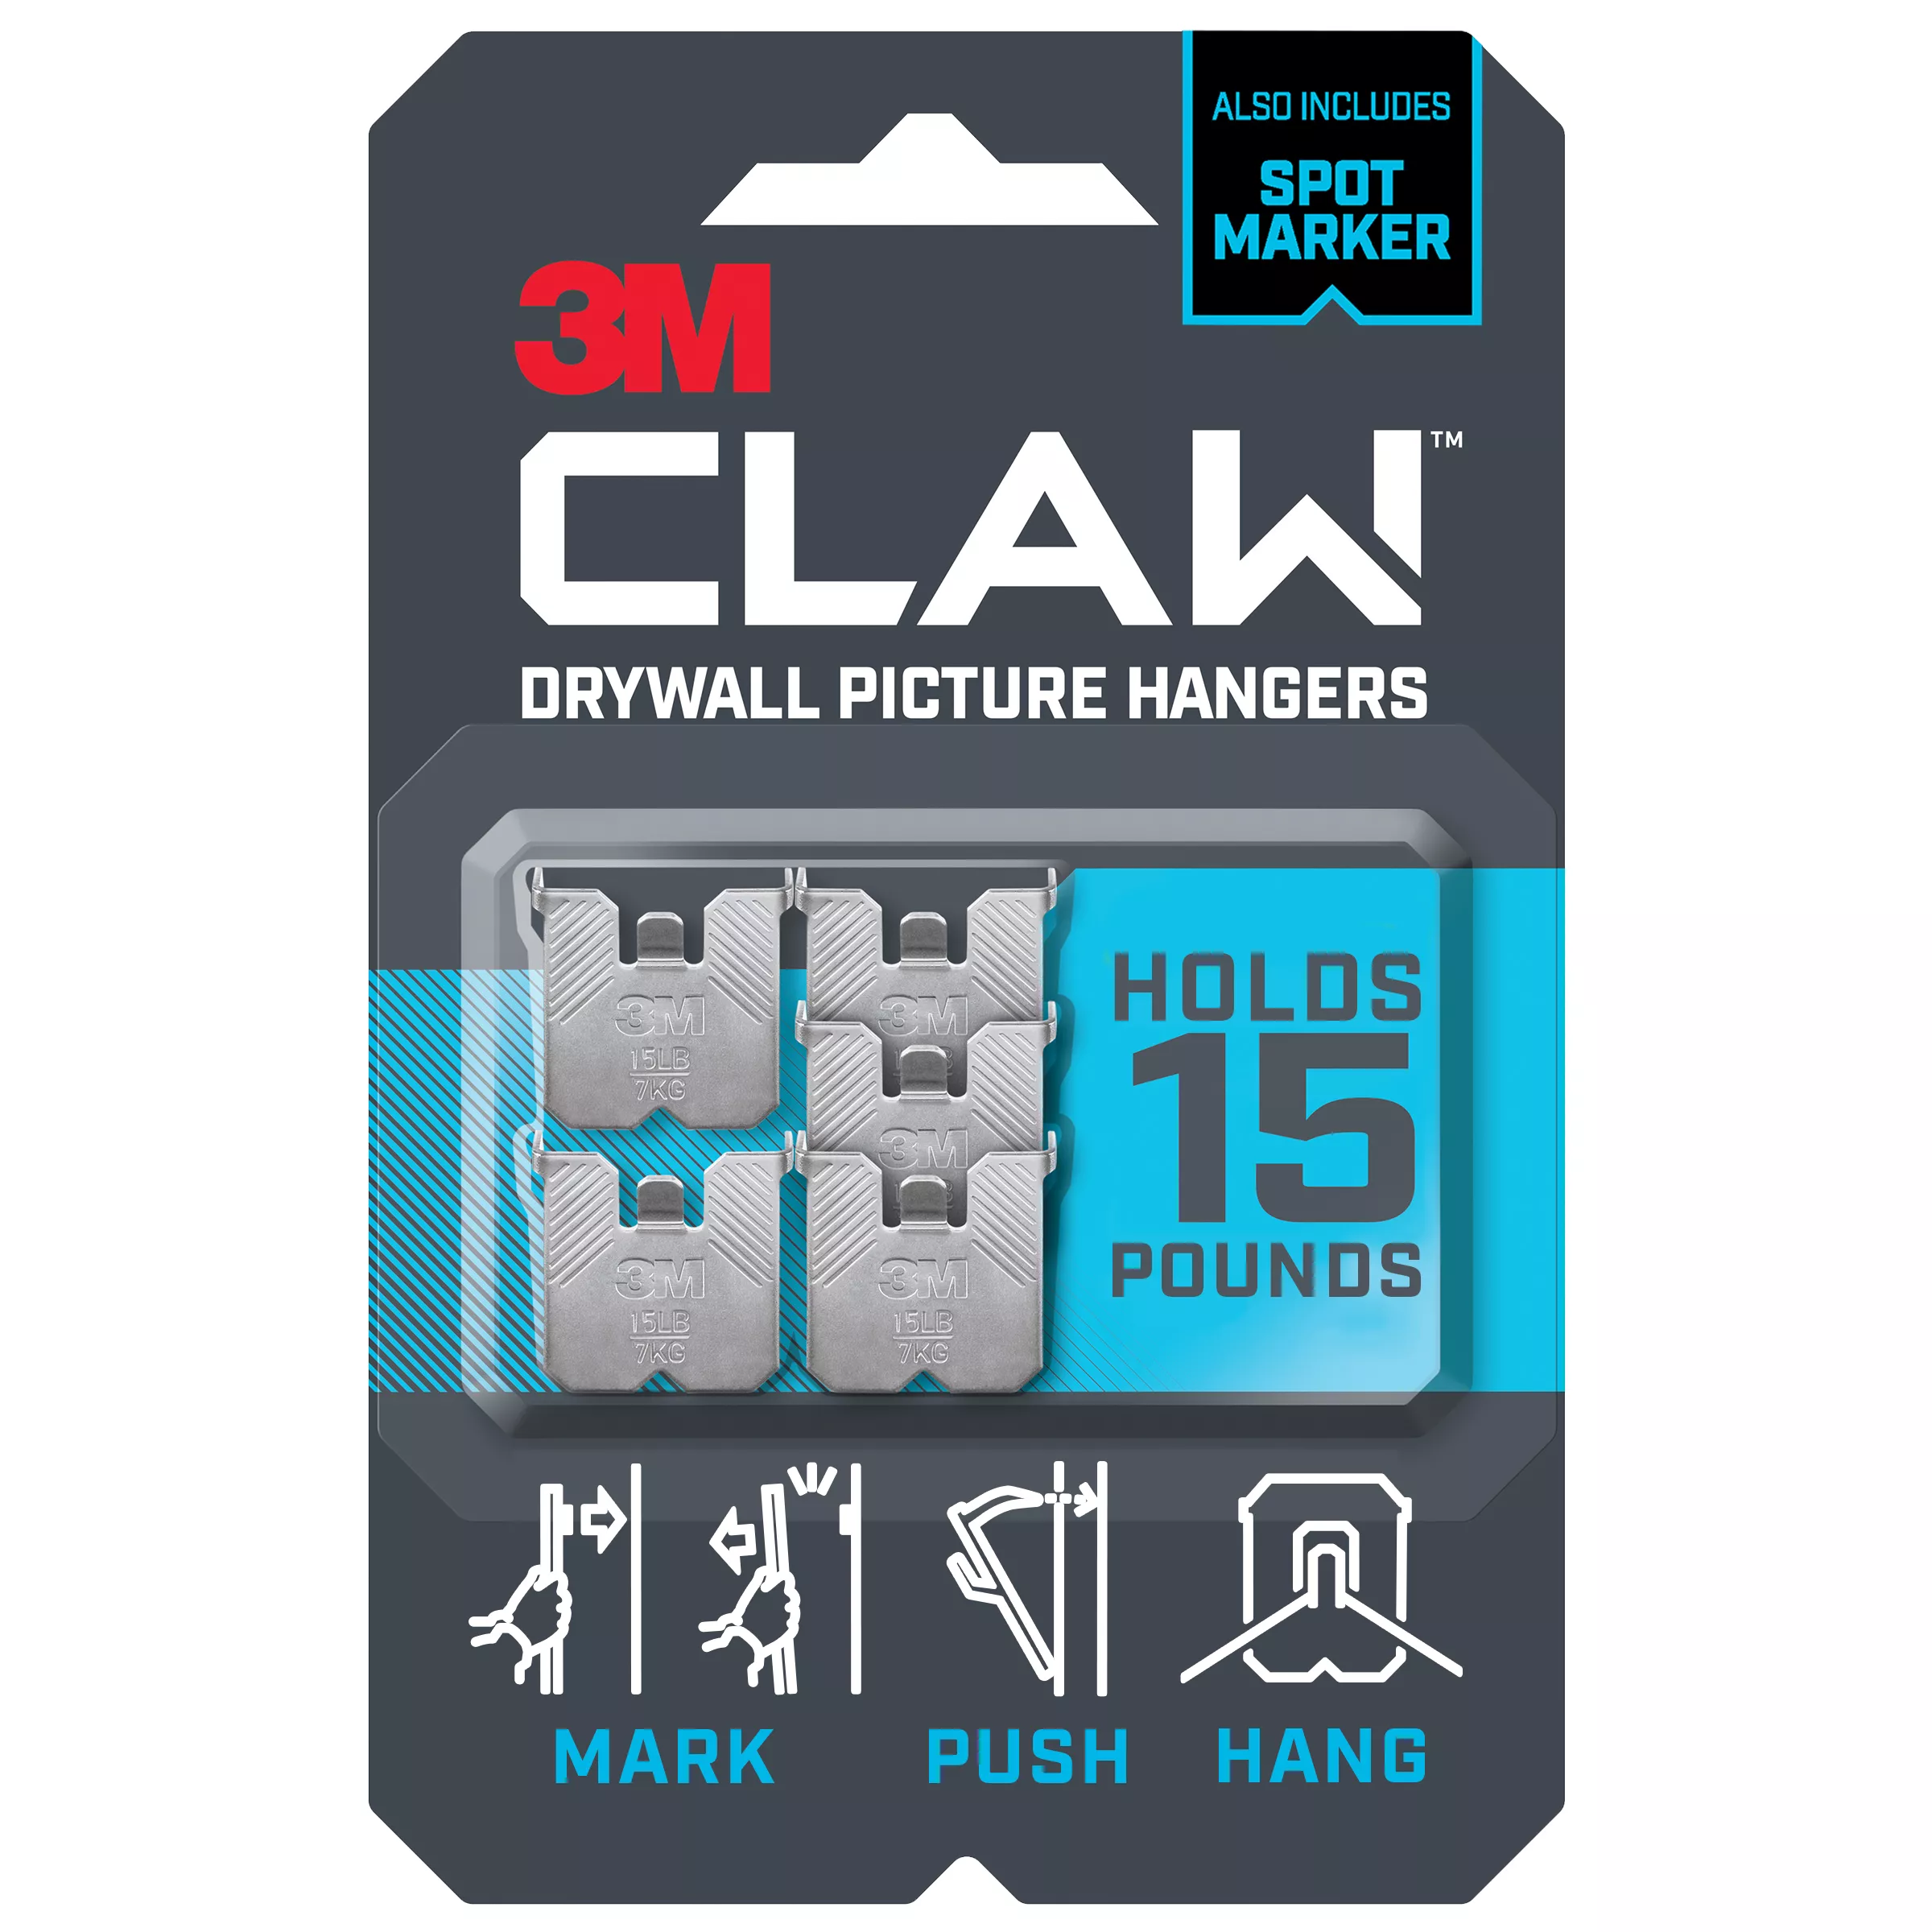 SKU 7100233165 | 3M™ CLAW™ Drywall Picture Hanger 15 lb with Temporary Spot Marker 3PH15M-5ES